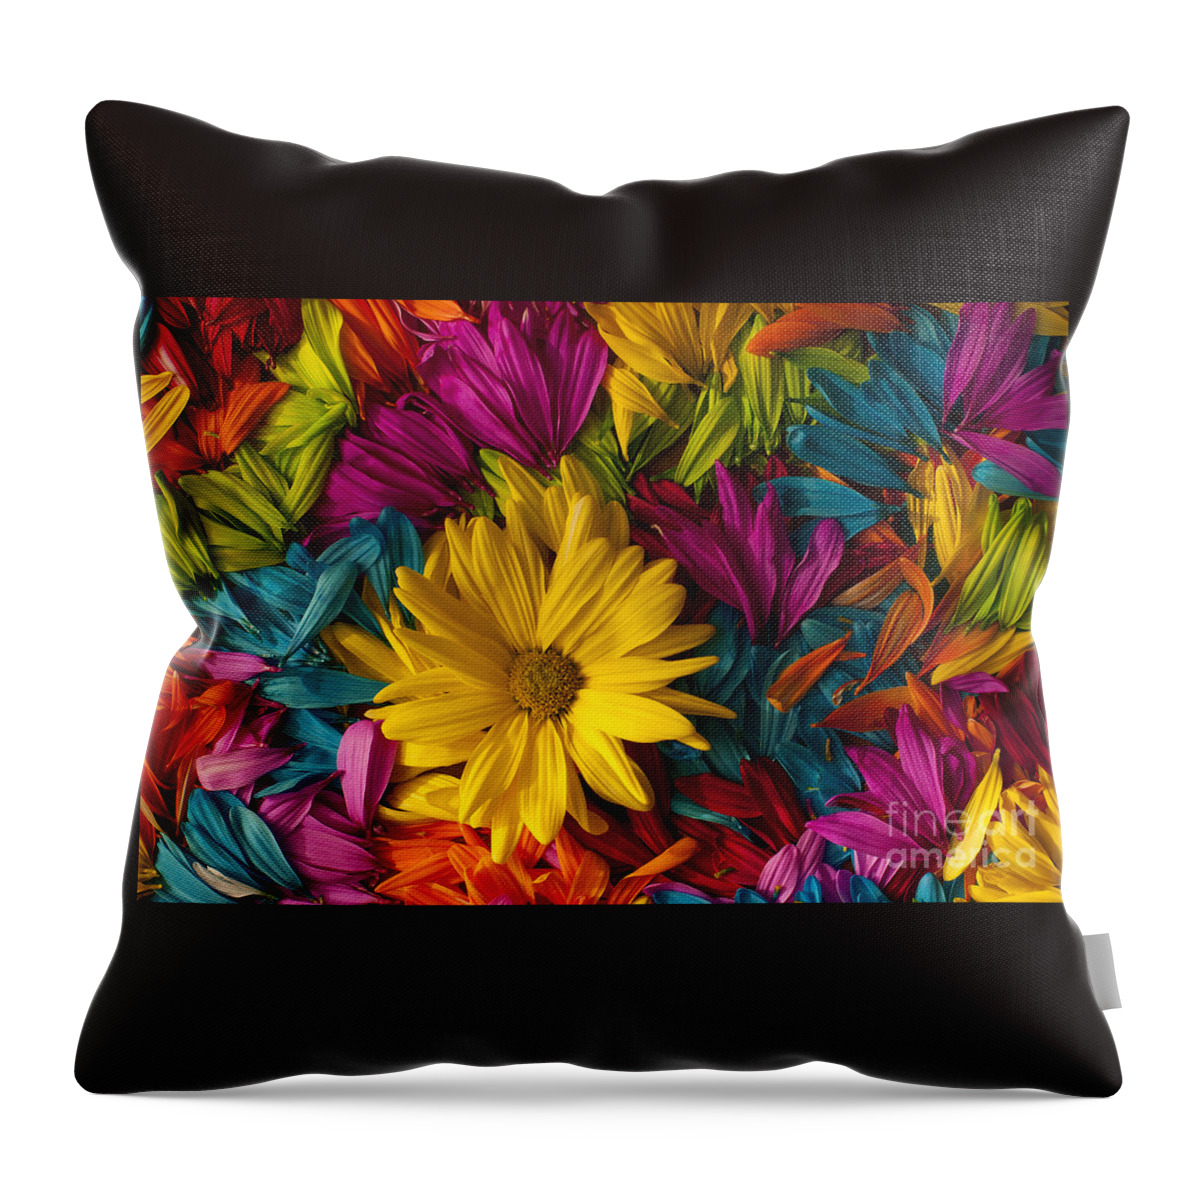 Abstract Throw Pillow featuring the photograph Daisy Petals Abstracts #10 by Jim Corwin